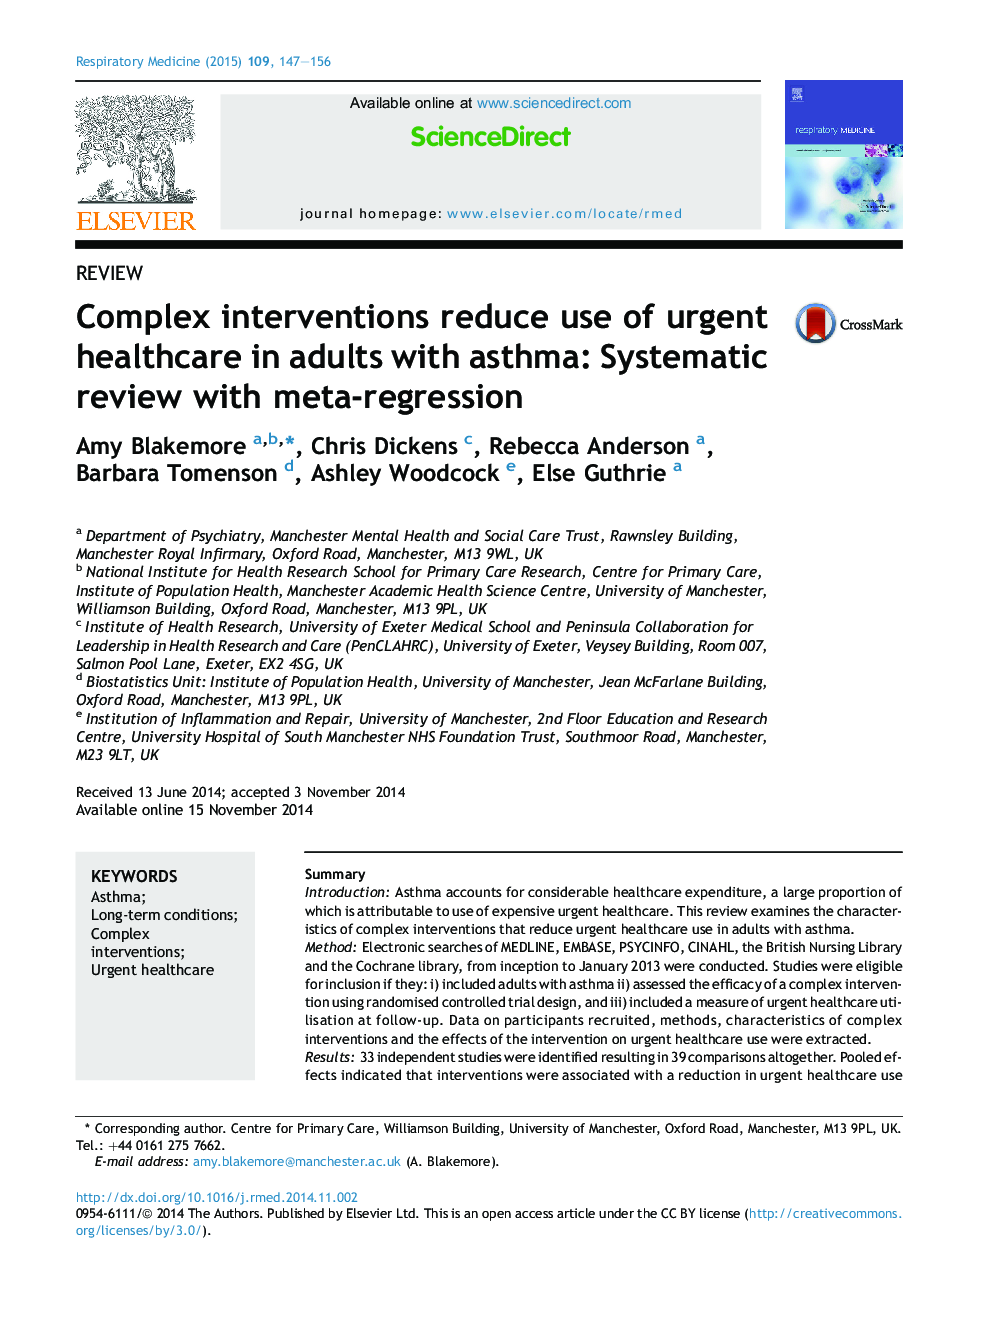 Complex interventions reduce use of urgent healthcare in adults with asthma: Systematic review with meta-regression